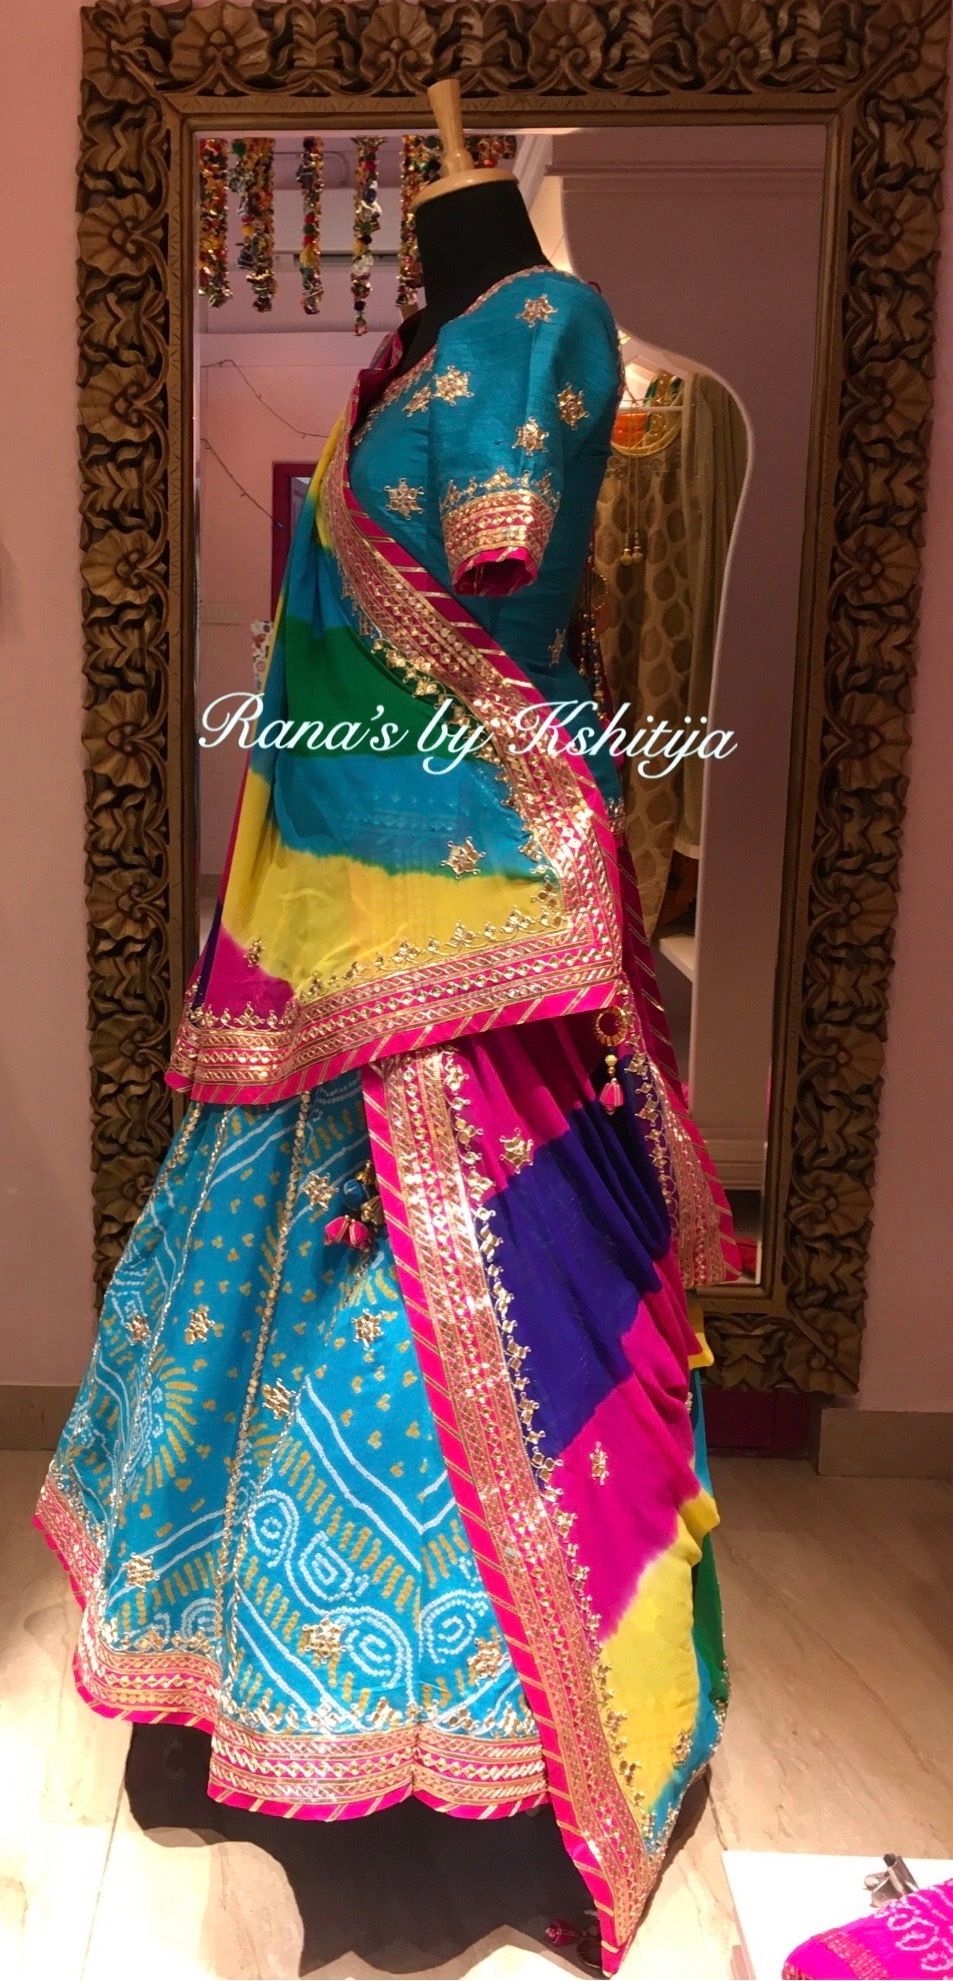 Photo From LATEST FOR THE UPCOMING WEDDING SEASON - By RANA'S by Kshitija